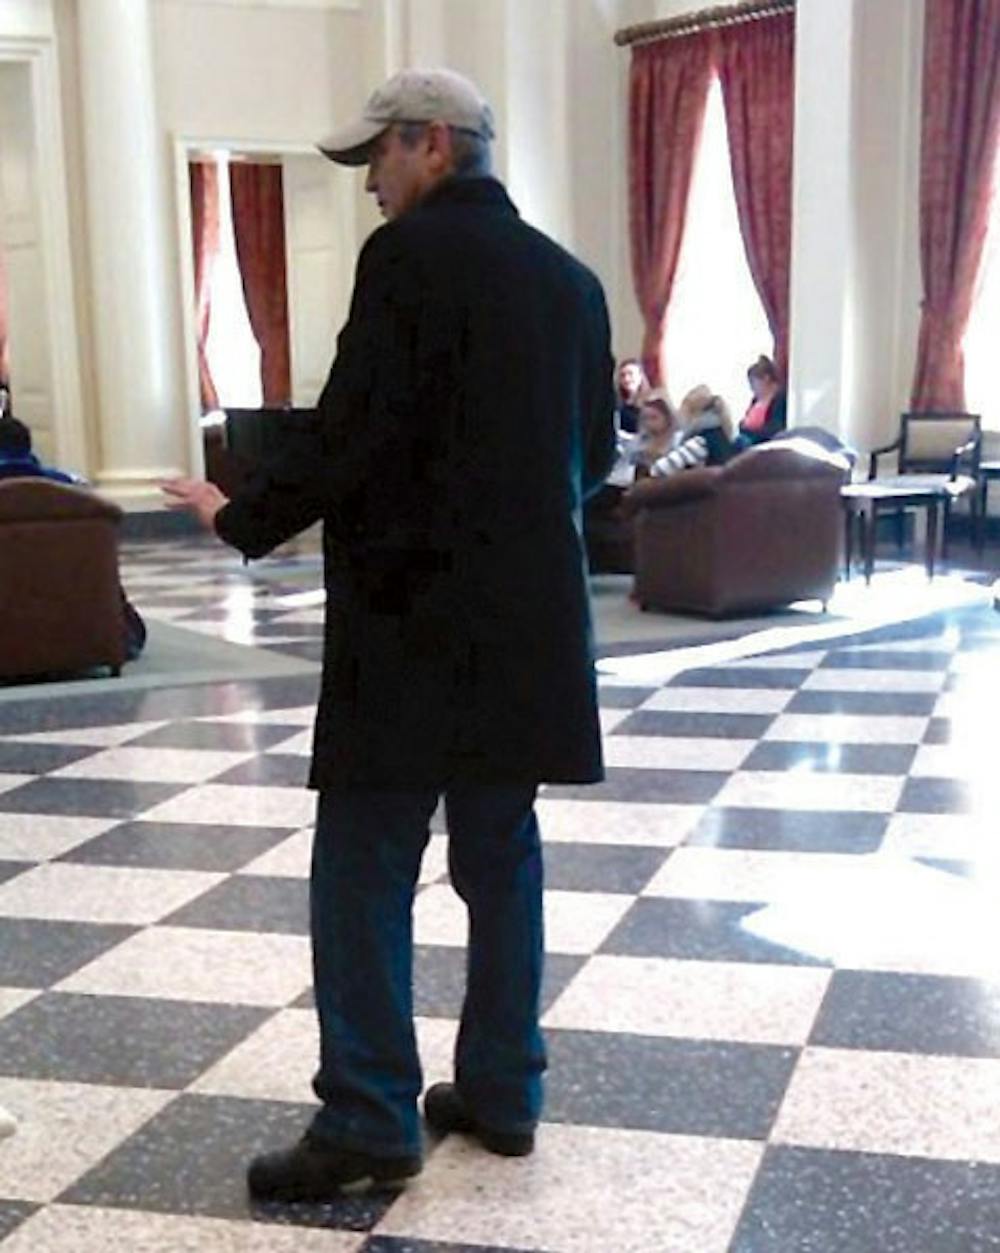 George Clooney stands in the lobby of the Farmer School of Business on Feb. 2 to scout locations for his upcoming movie.